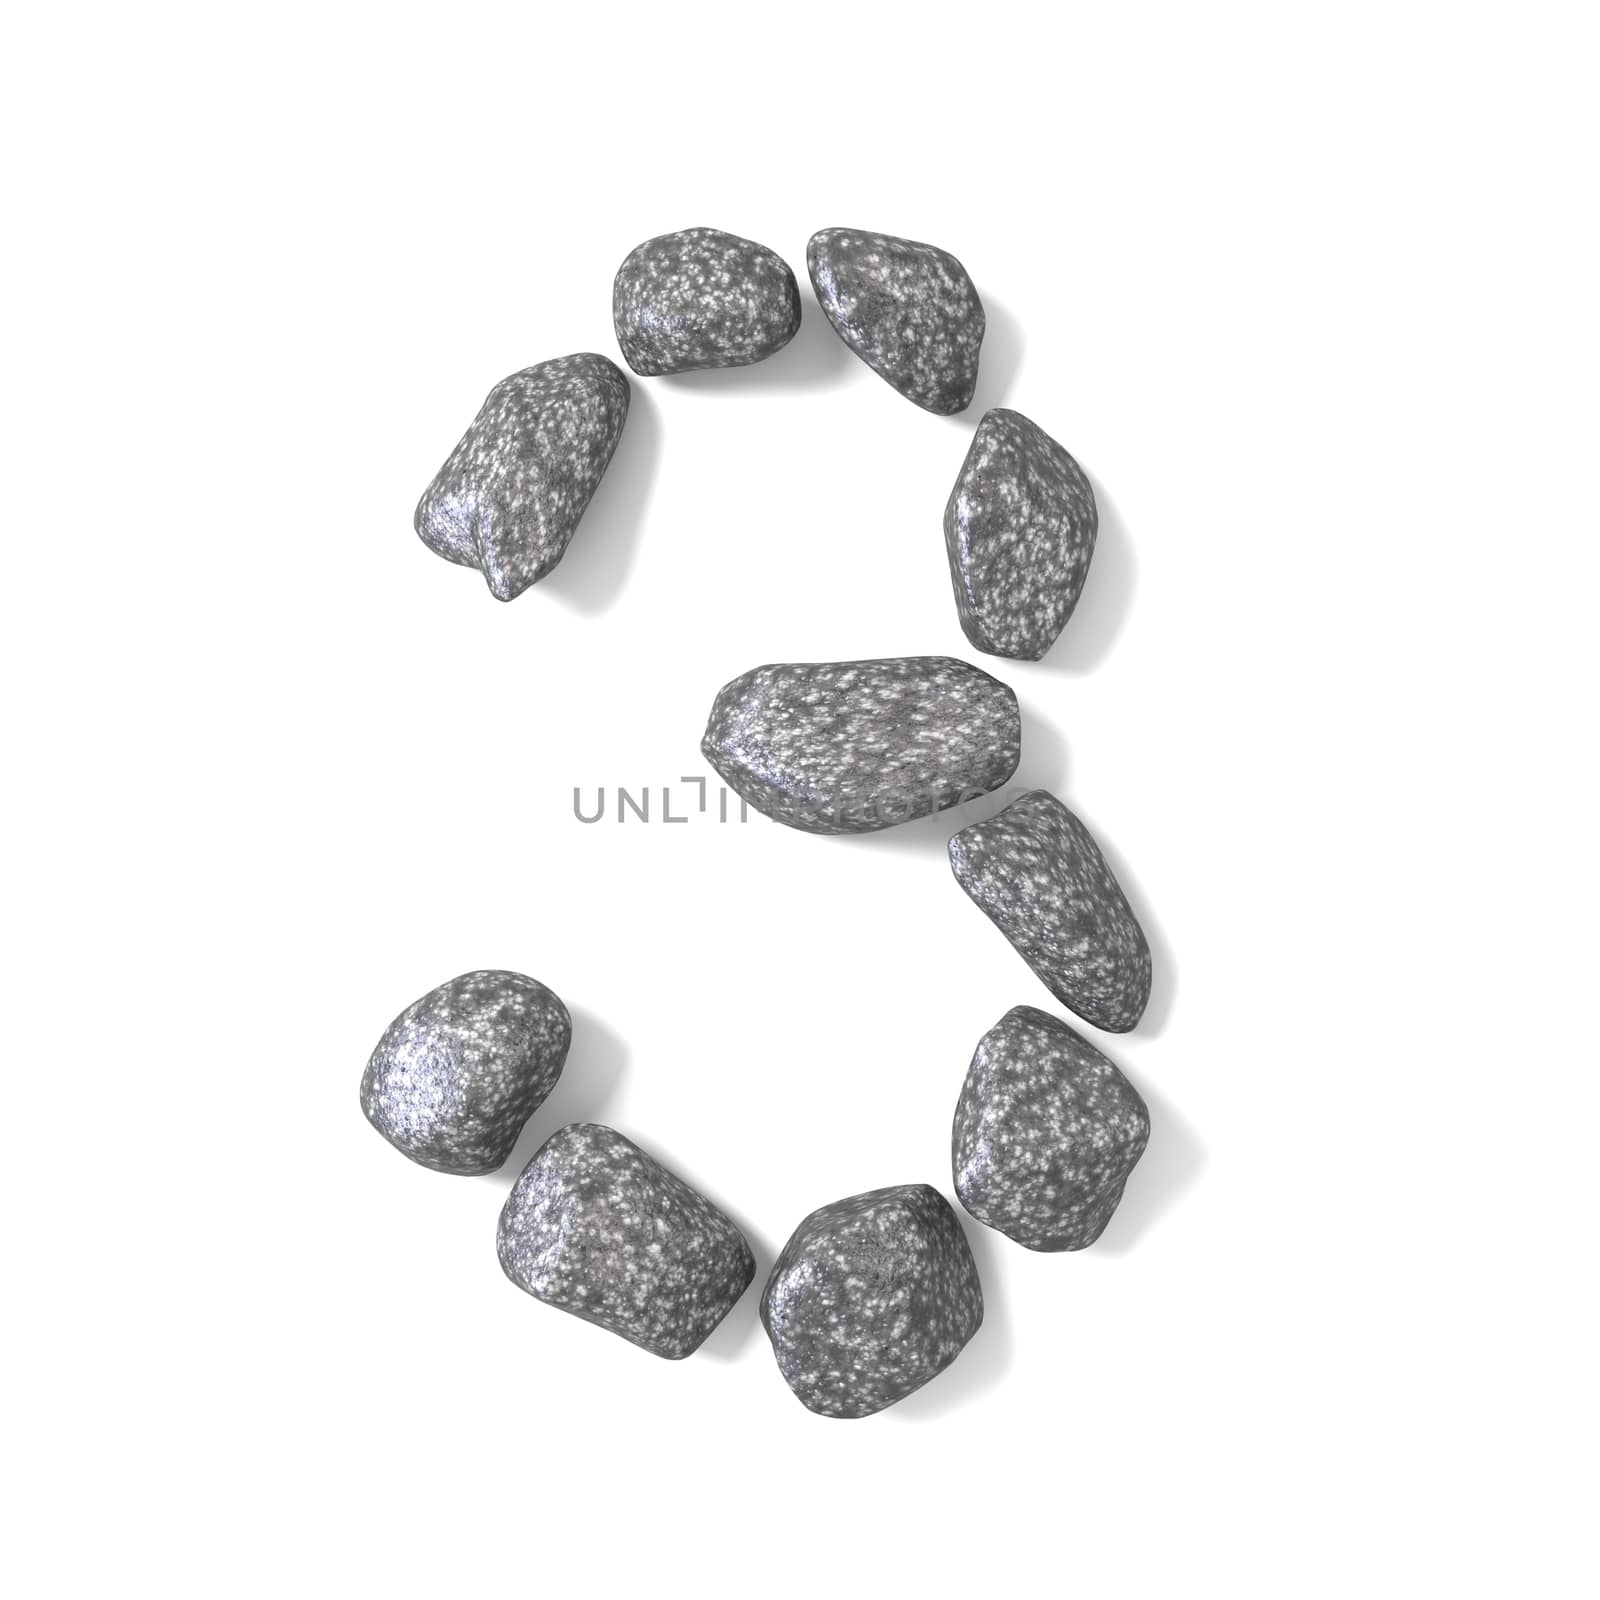 Font made of rocks NUMBER three 3 3D render illustration isolated on white background